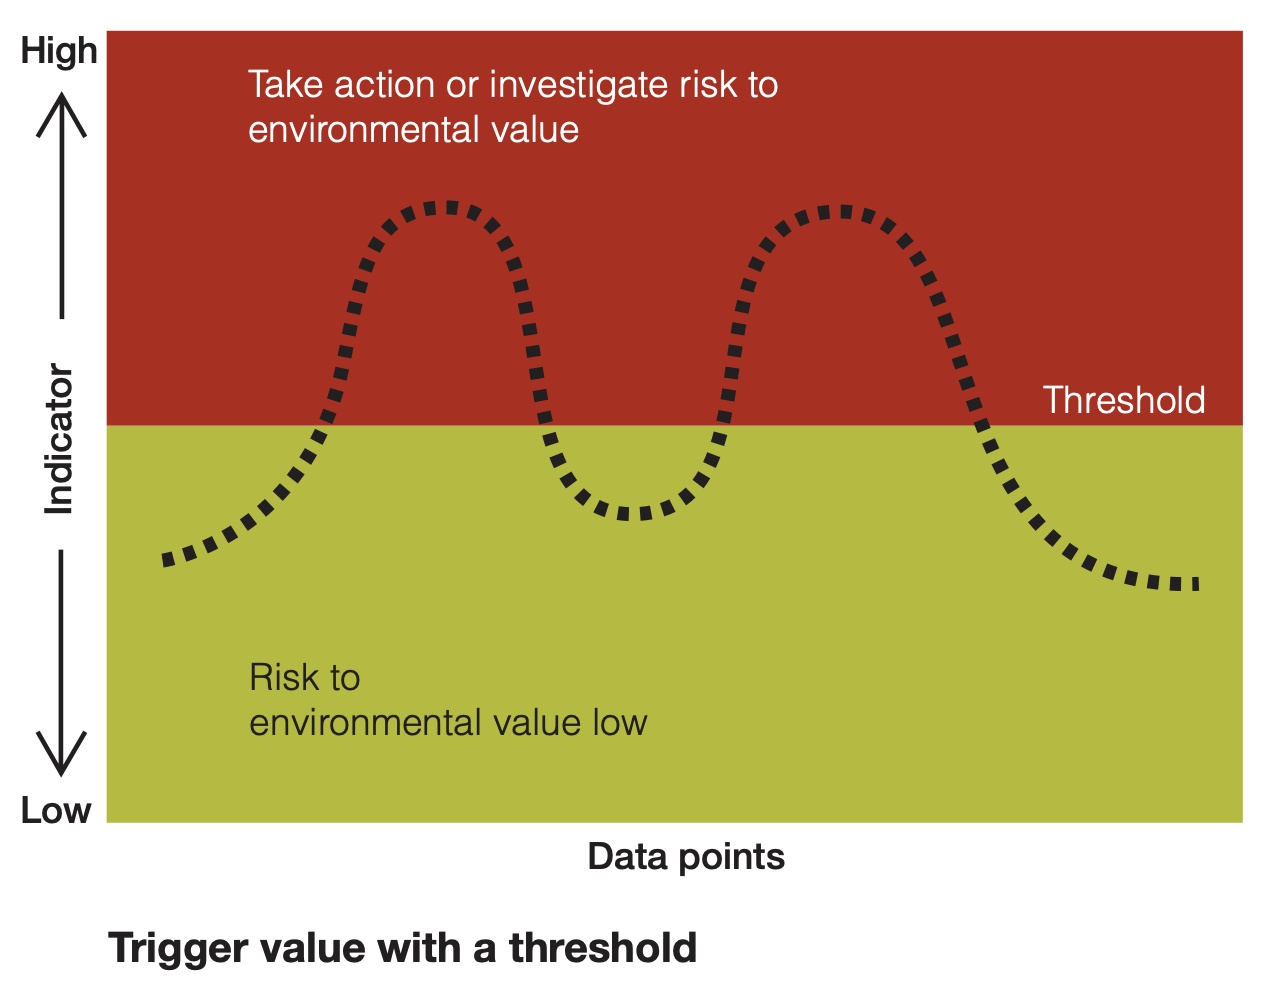 Trigger values show when a variable of interest exceeds a threshold